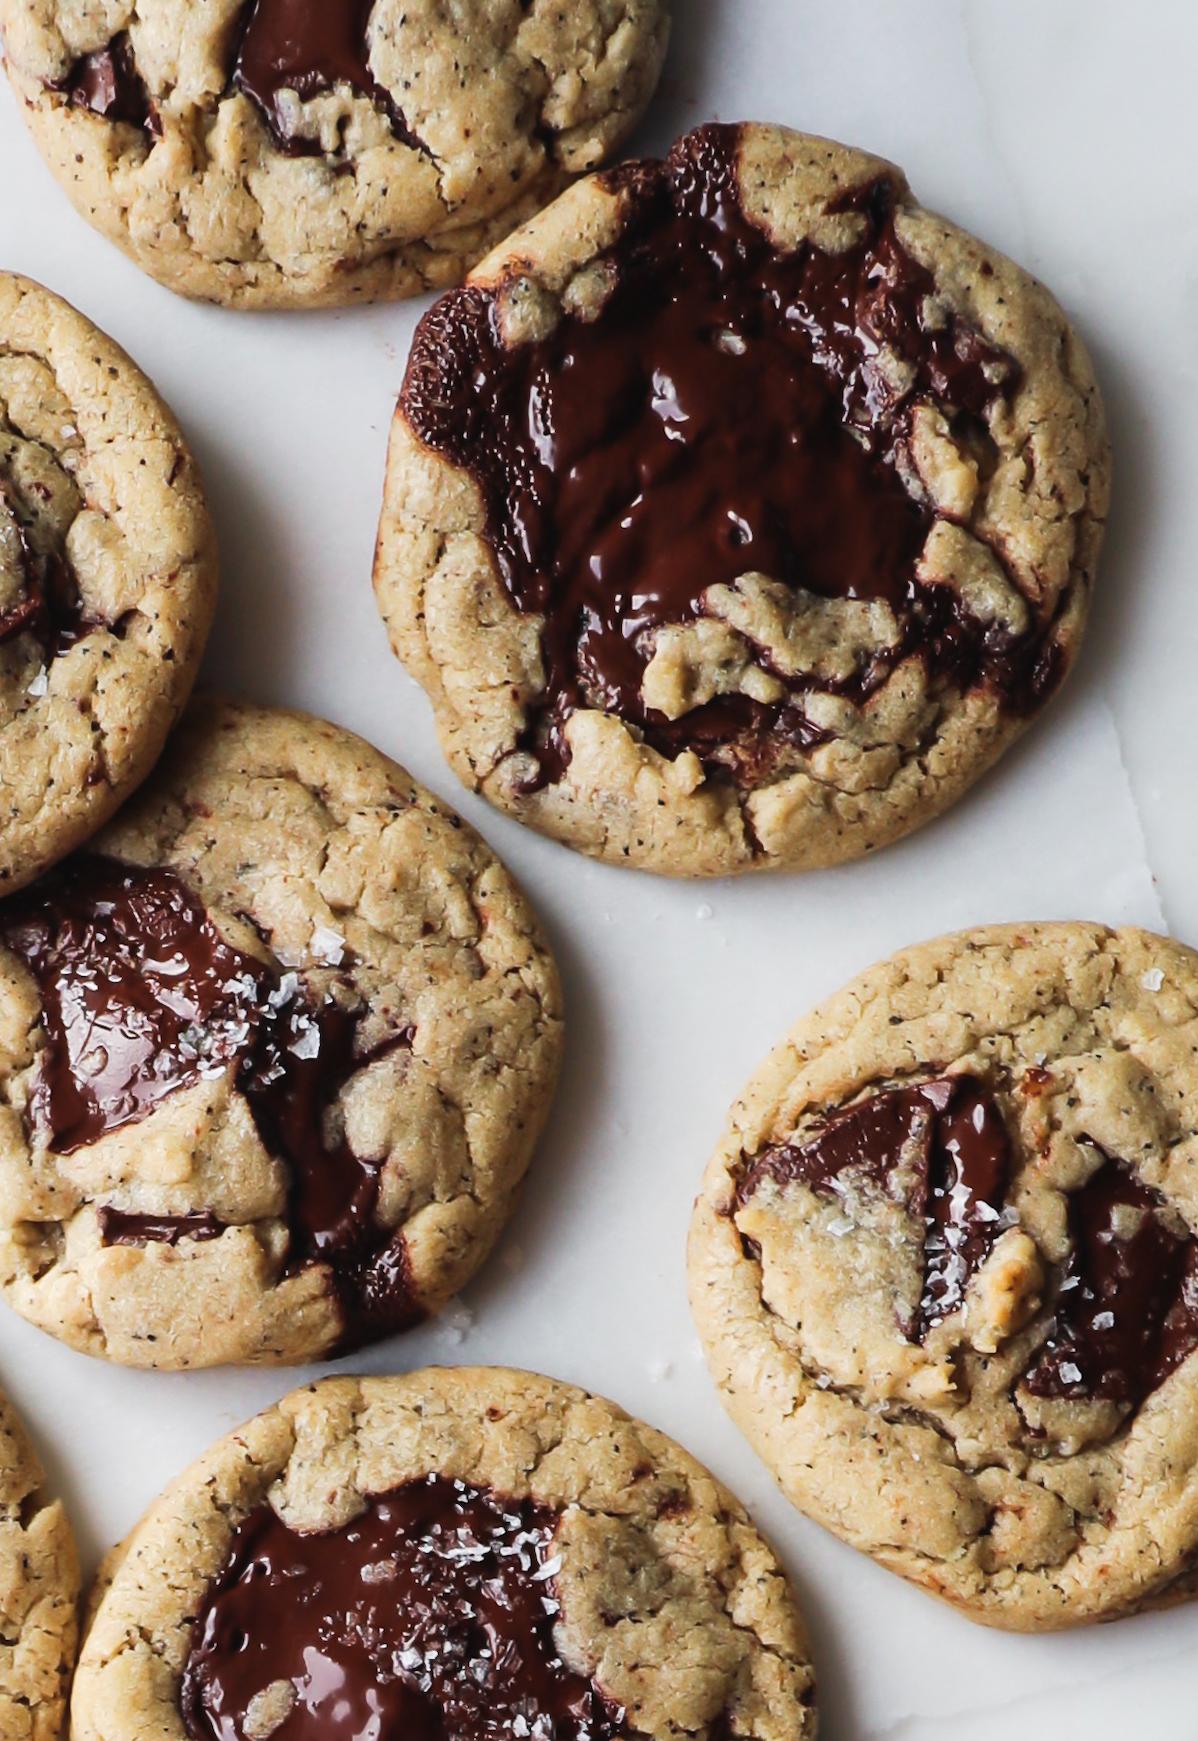  Take a break from your routine with a warm, gooey cookie paired with a fresh shot of espresso.